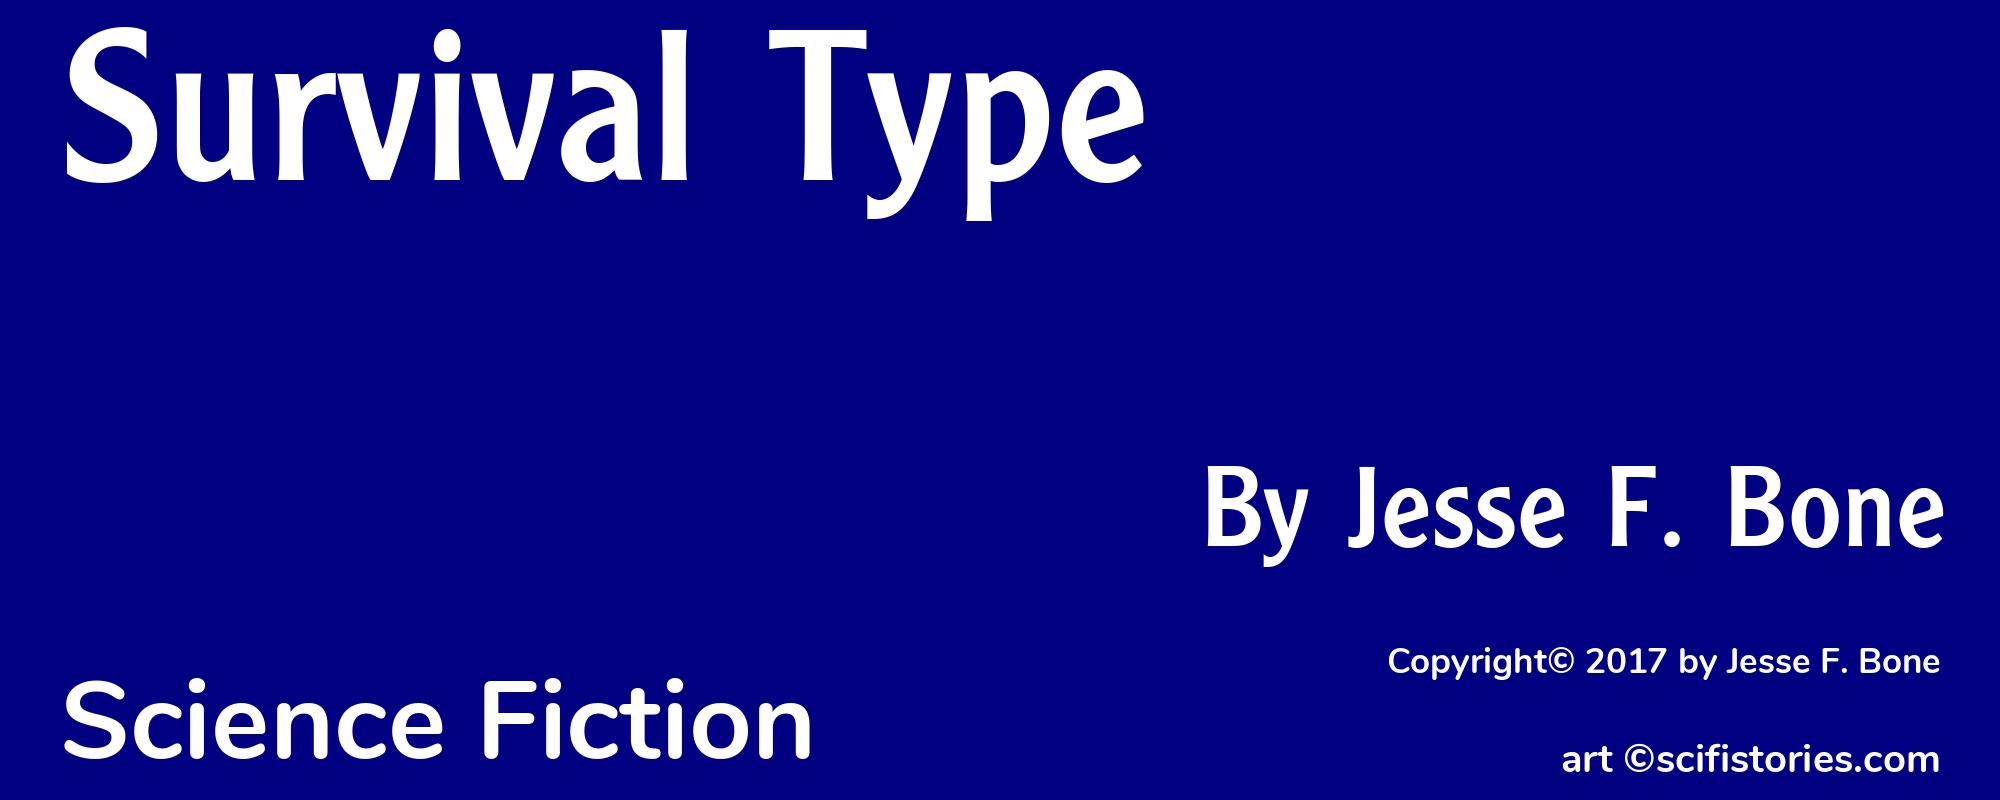 Survival Type - Cover